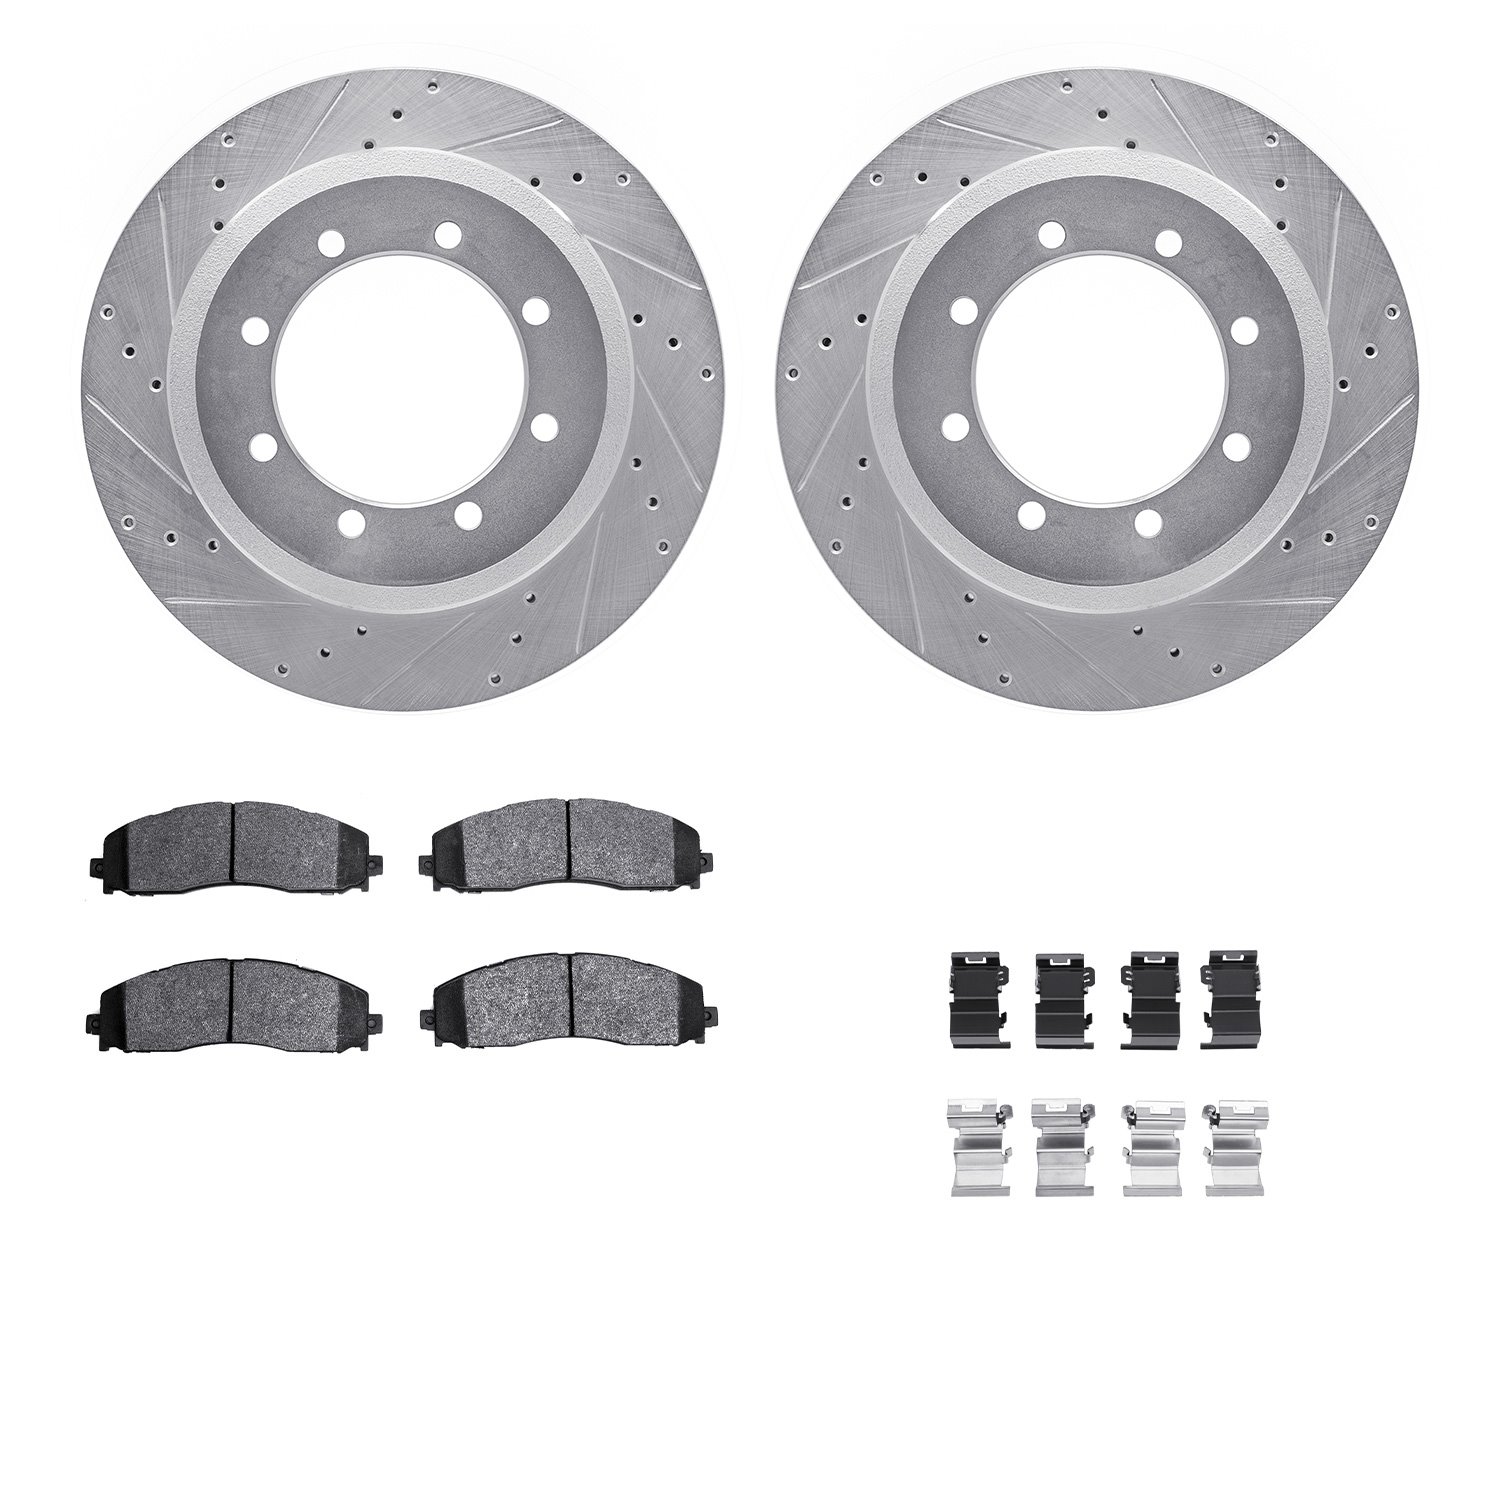 7212-99237 Drilled/Slotted Rotors w/Heavy-Duty Brake Pads Kit & Hardware [Silver], Fits Select Ford/Lincoln/Mercury/Mazda, Posit